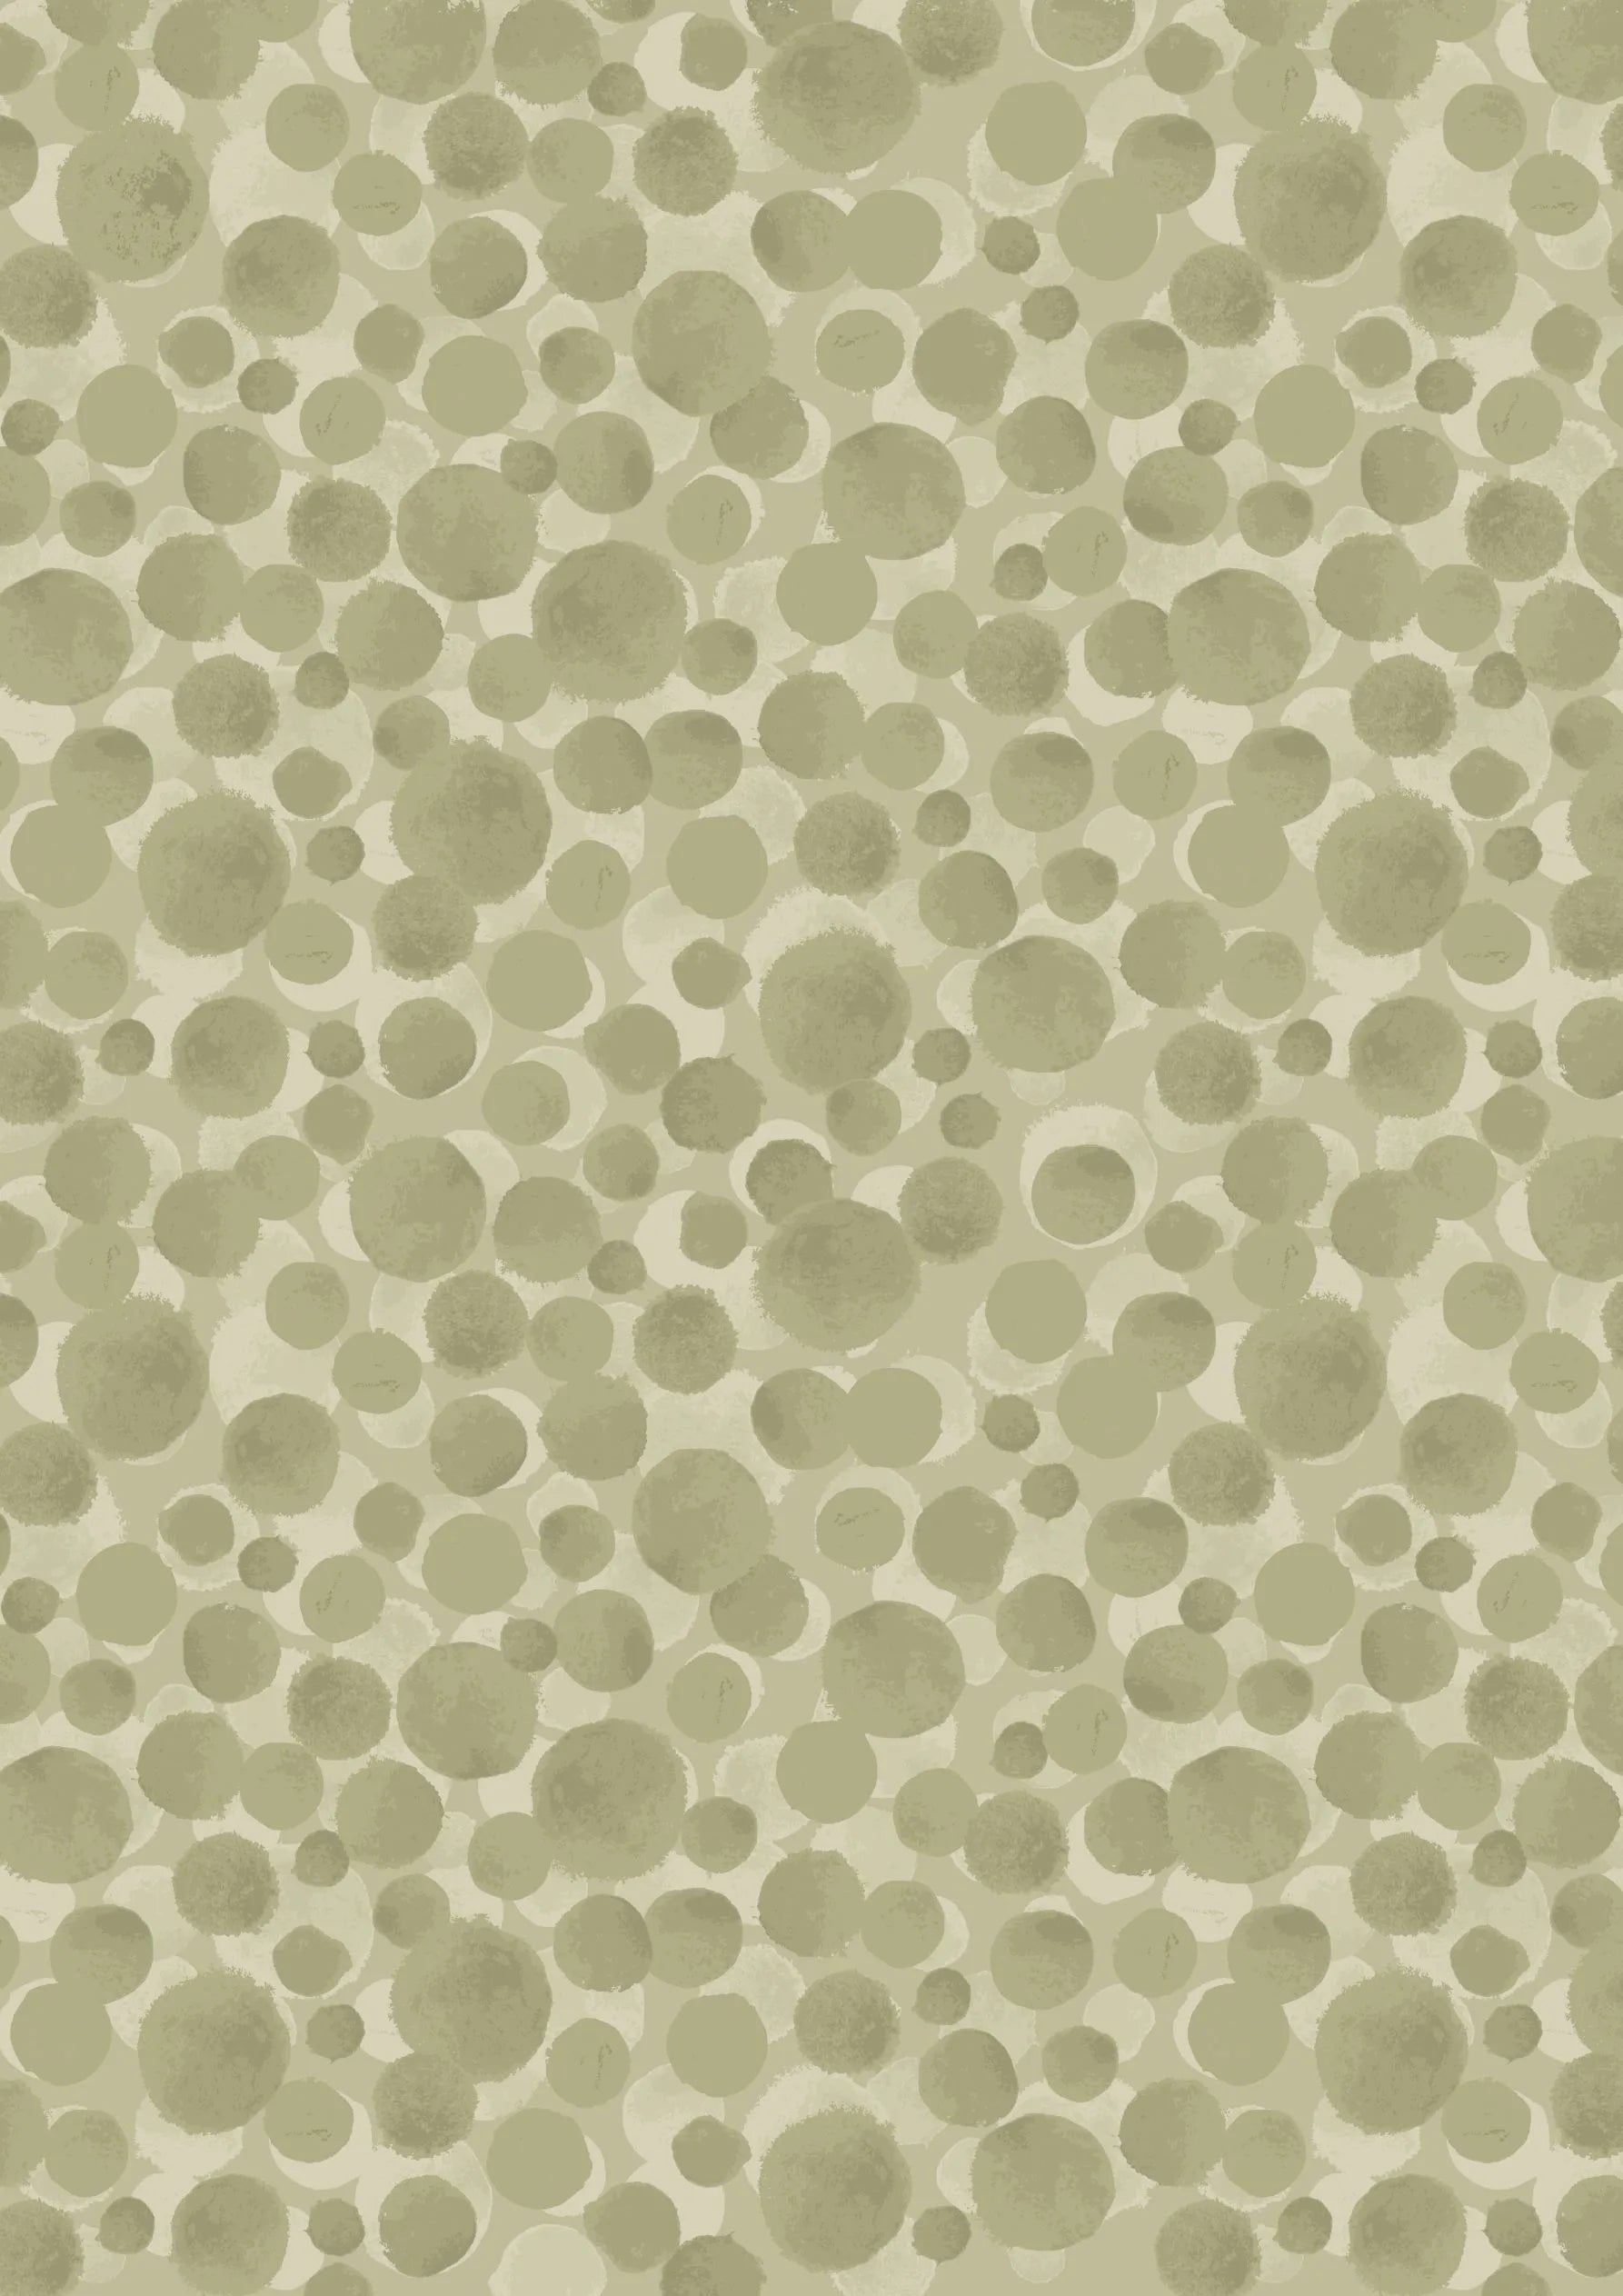 Bluebell Wood Reloved Quilt Fabric - Bumbleberries Blender in Wild Sage Green - BB288